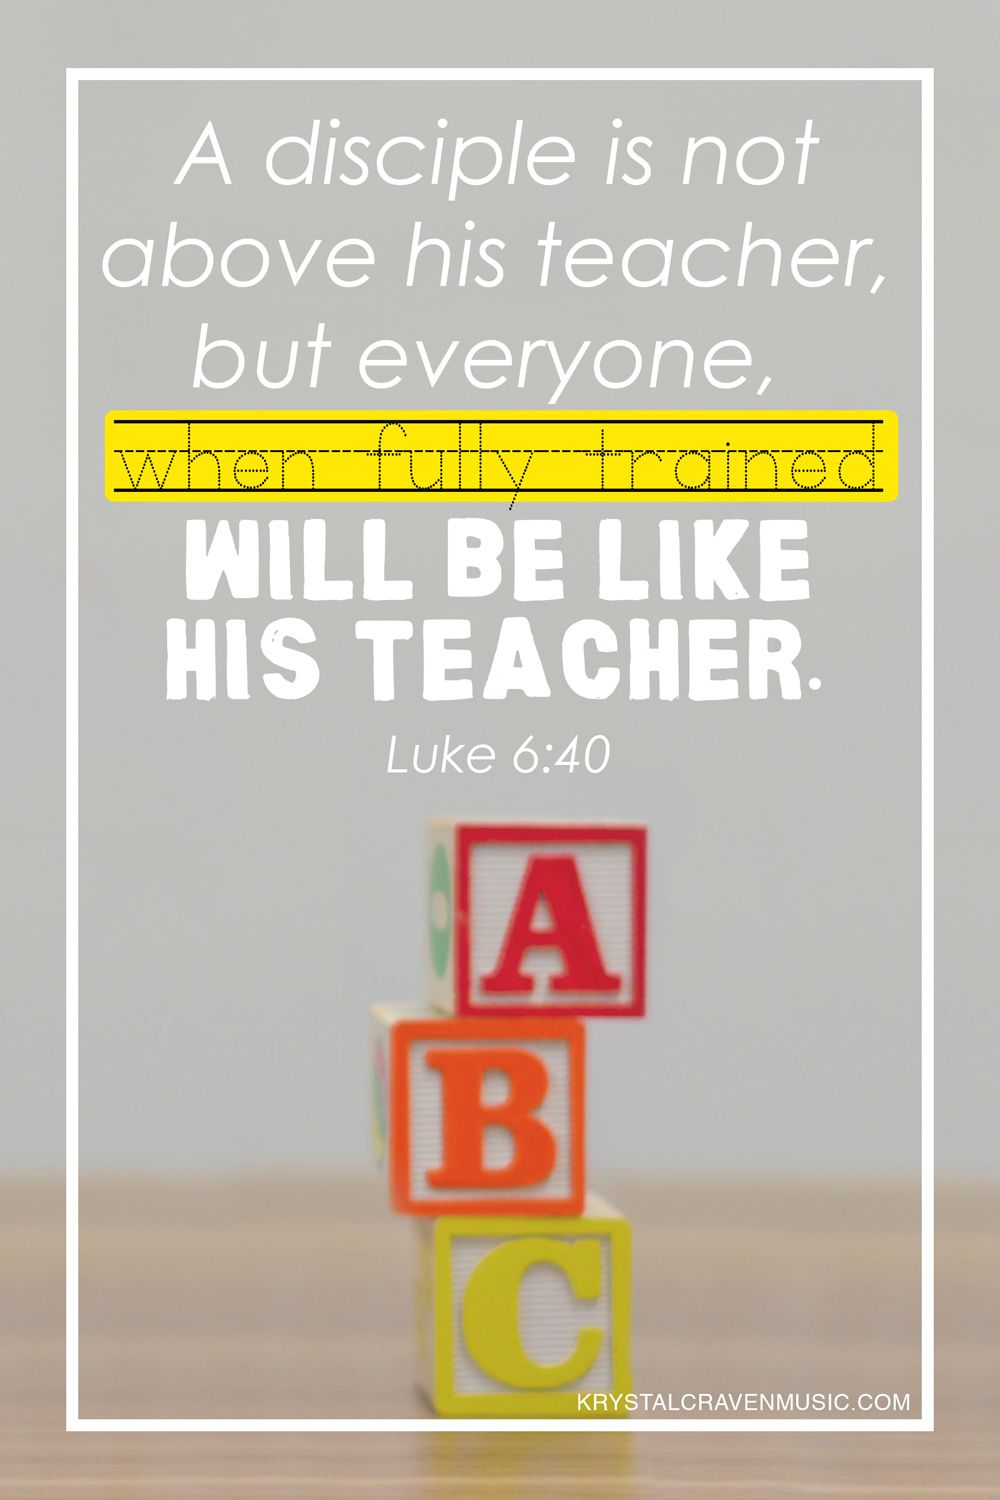 The bible verse Luke 6:40 "A disciple is not above his teacher, but everyone, when fully trained, will be like his teacher" overlaying a desk with ABC blocks on it.